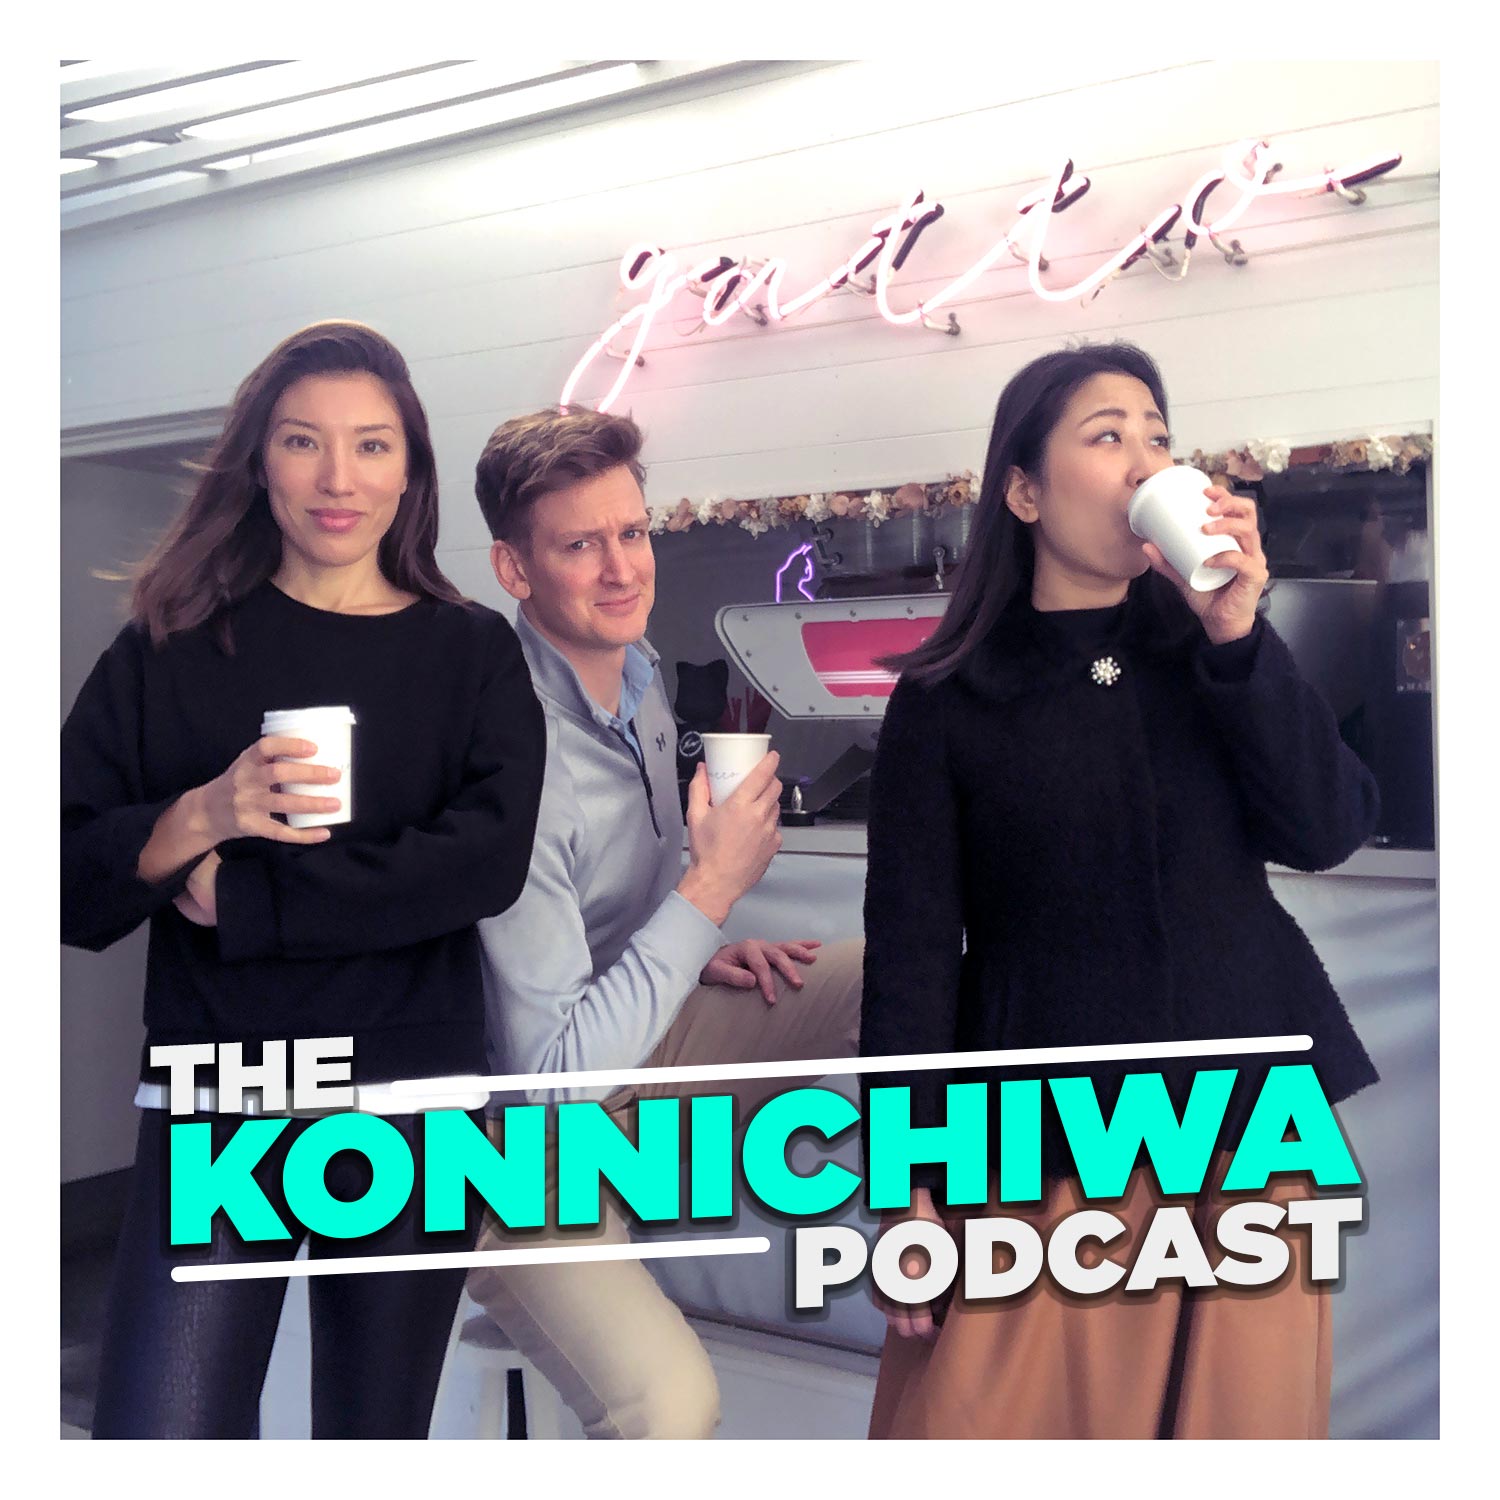 The Konnichiwa Podcast - Conversations in English and Japanese